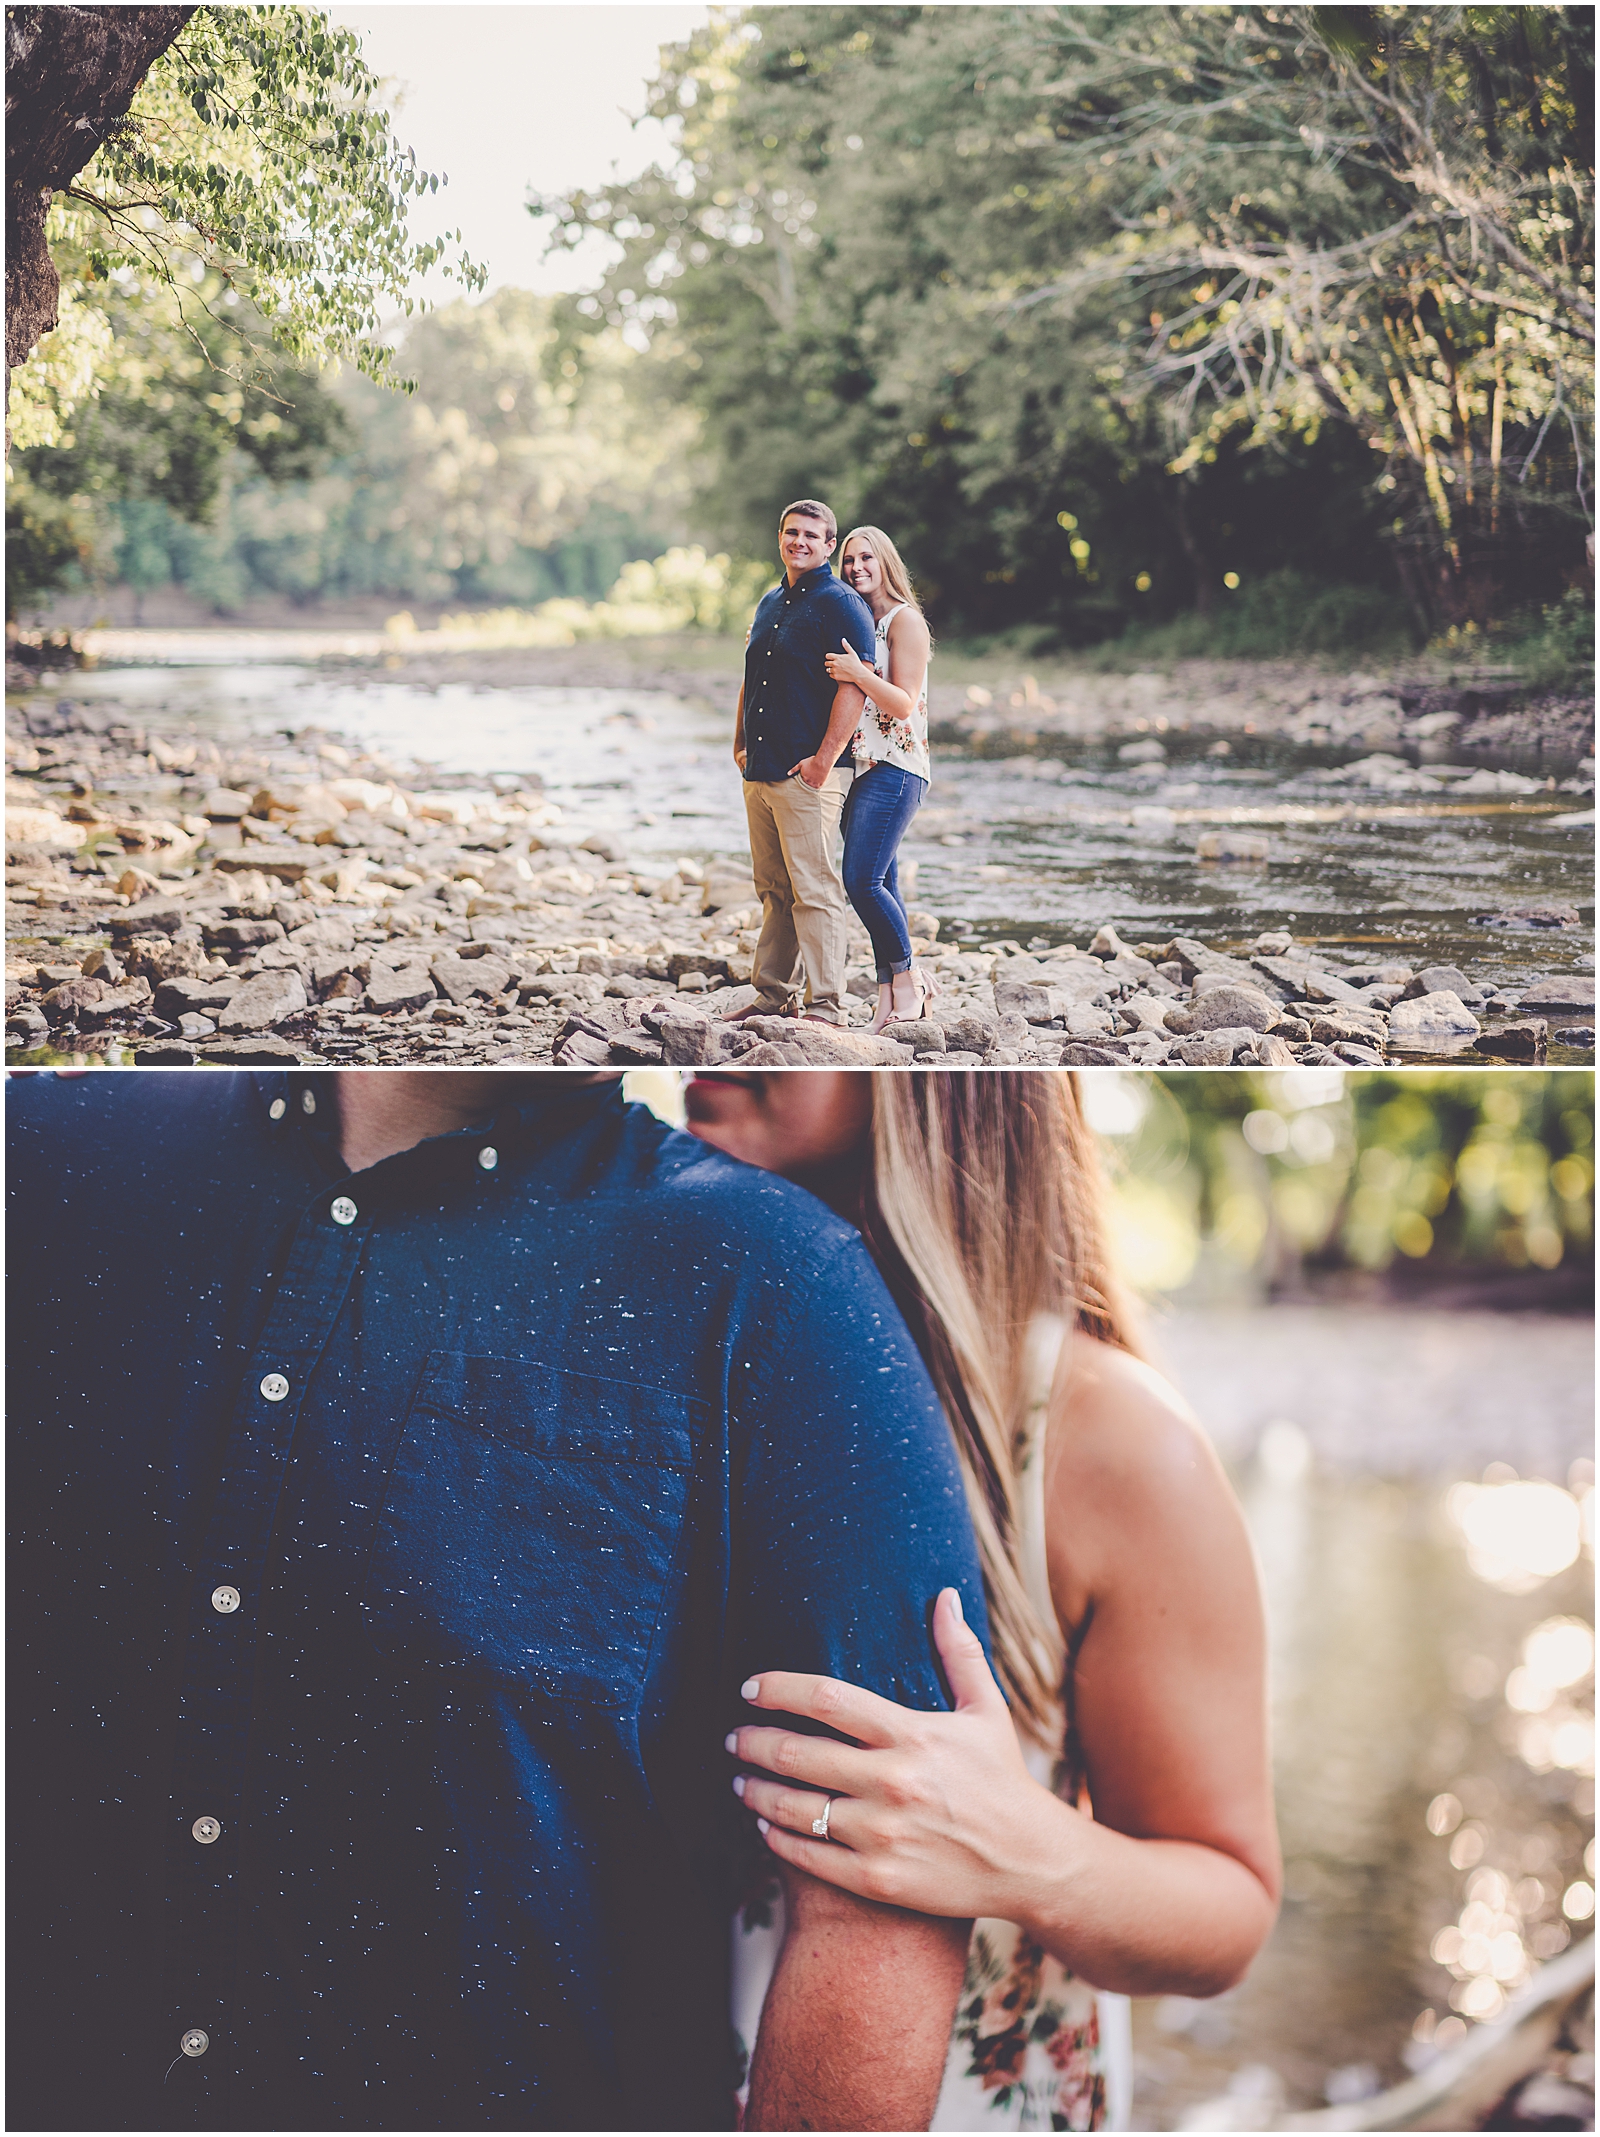 Samantha and Mitchell's summer Kankakee County engagement session with Chicagoland wedding photographer Kara Evans Photographer.